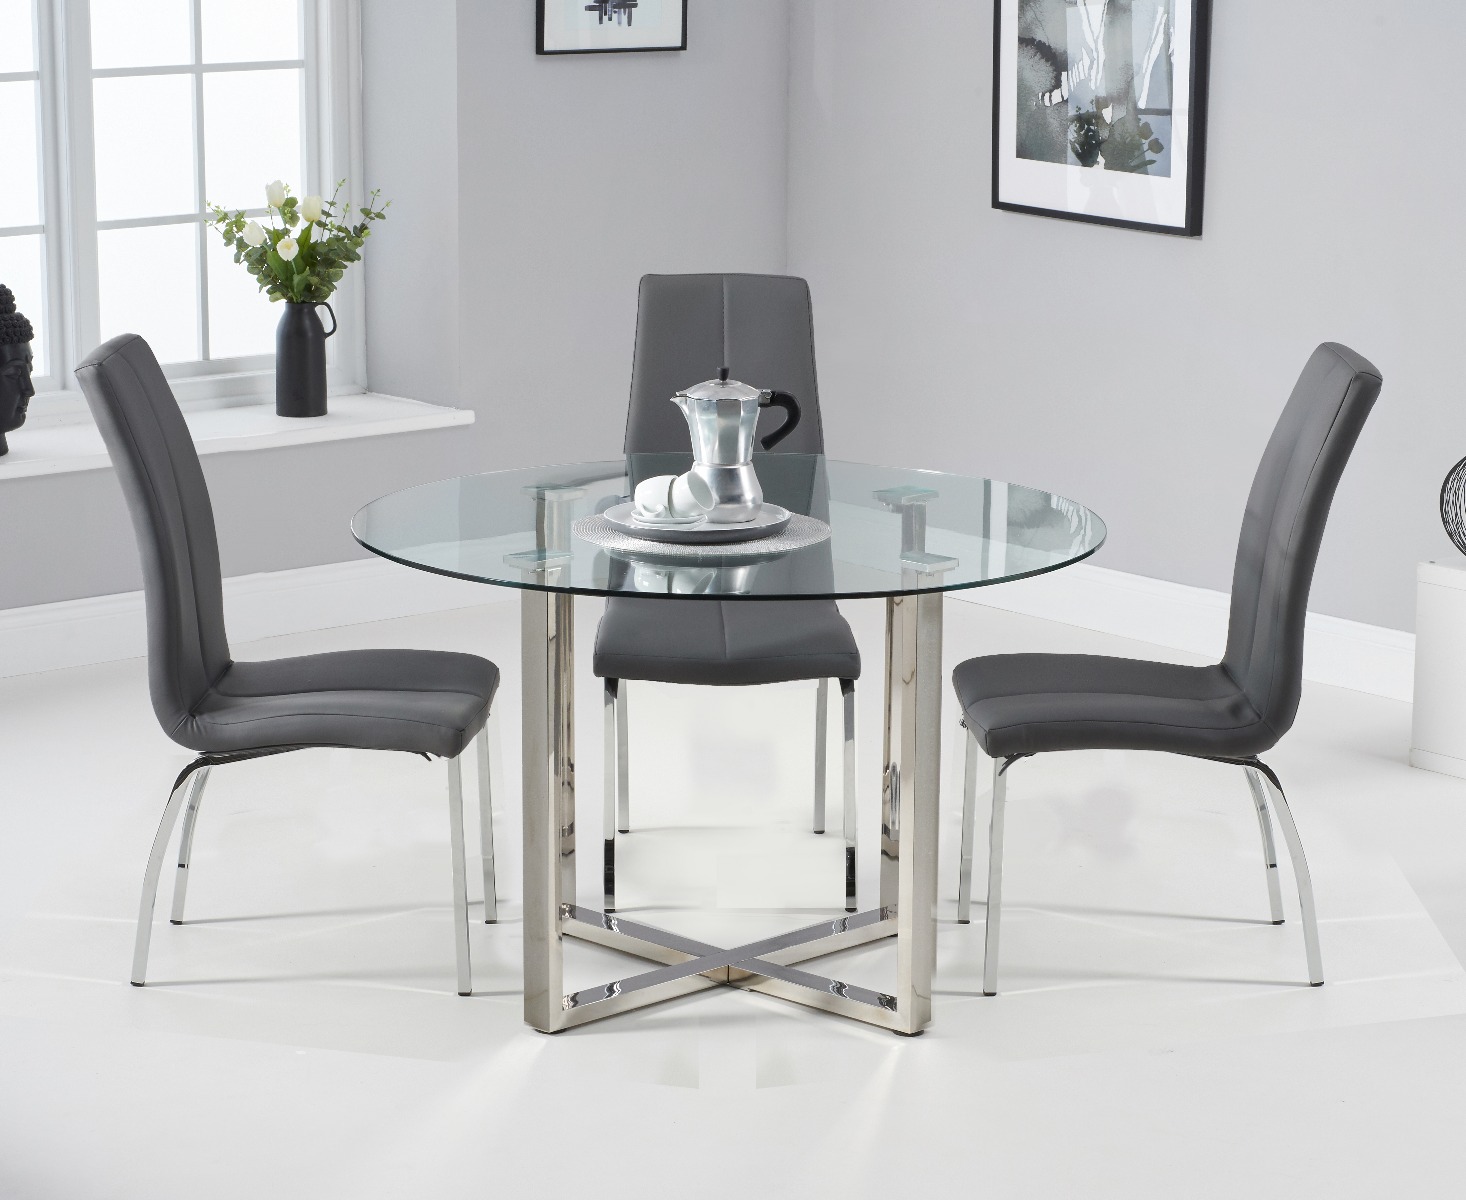 Vaso 120cm Round Glass Dining Table With 4 Black Marco Chairs